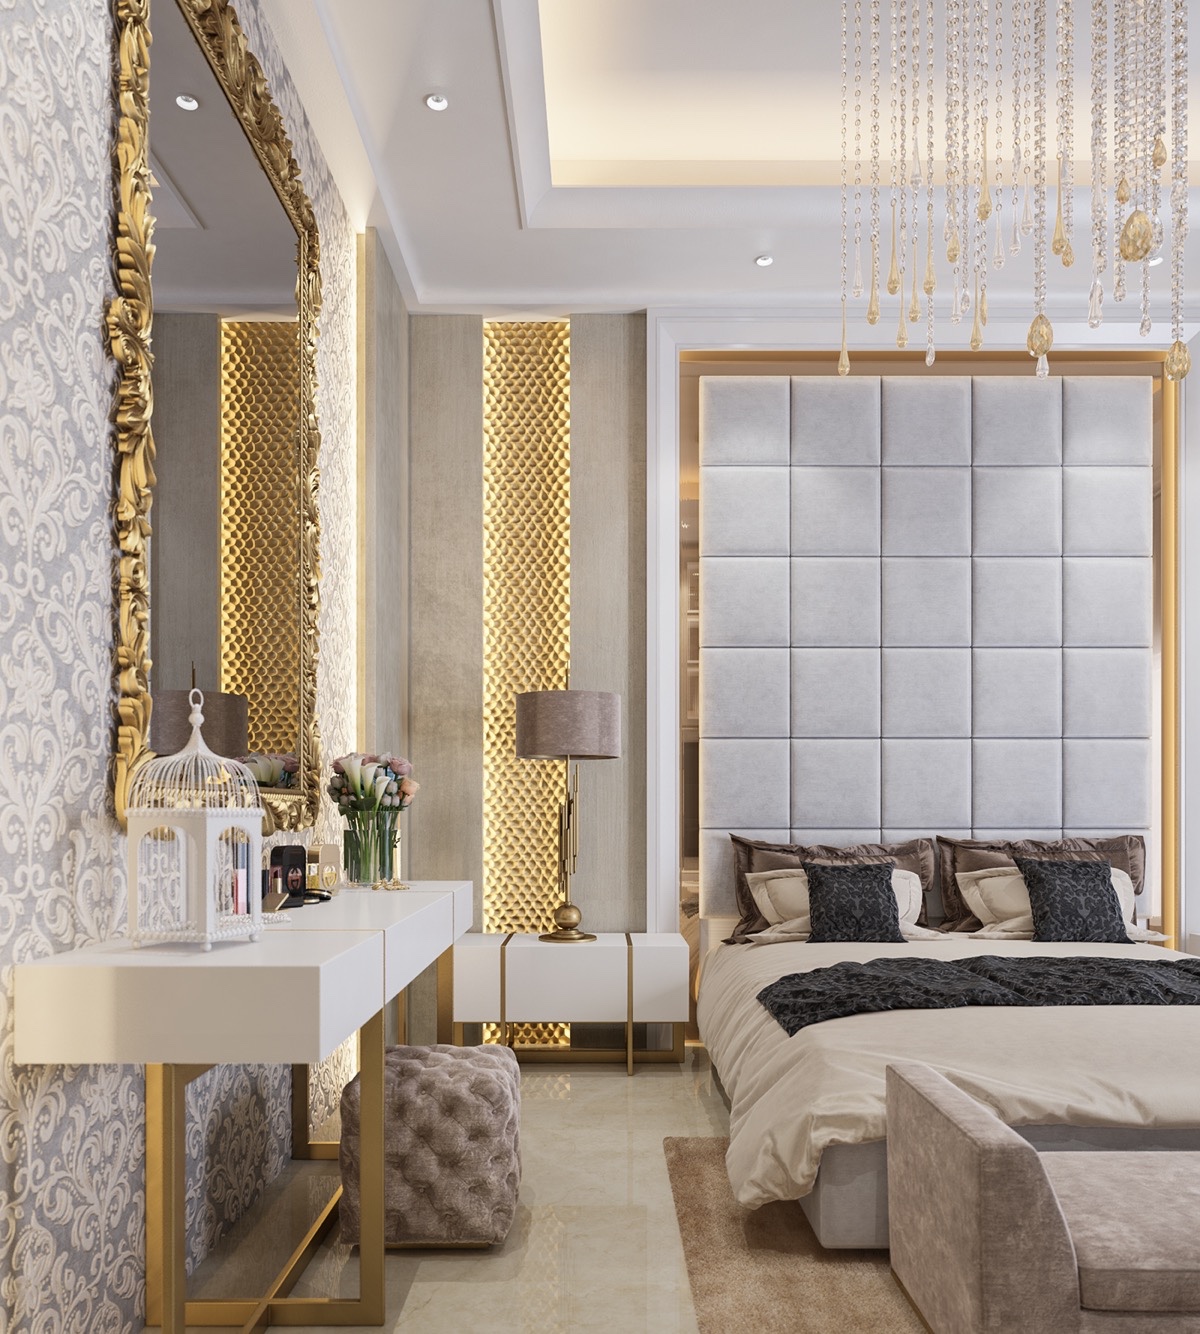 Design and decoration ideas for the master bedroom "width =" 1200 "height =" 1334 "srcset =" https://mileray.com/wp-content/uploads/2020/05/1588510655_536_5-Master-Bedroom-Design-Ideas-With-Simple-Theme-and-Decoration.jpg 1200w, https://mileray.com/wp-content/uploads/2016/06/I-Max-Studio-1-1-270x300.jpg 270w, https://mileray.com/wp-content/uploads/2016 / 06 / I-Max-Studio-1-1-768x854.jpg 768w, https://mileray.com/wp-content/uploads/2016/06/I-Max-Studio-1-1-921x1024.jpg 921w , https://mileray.com/wp-content/uploads/2016/06/I-Max-Studio-1-1-696x774.jpg 696w, https://mileray.com/wp-content/uploads/2016/ 06 /I-Max-Studio-1-1-1068x1187.jpg 1068w, https://mileray.com/wp-content/uploads/2016/06/I-Max-Studio-1-1-378x420.jpg 378w " Sizes = "(maximum width: 1200px) 100vw, 1200px